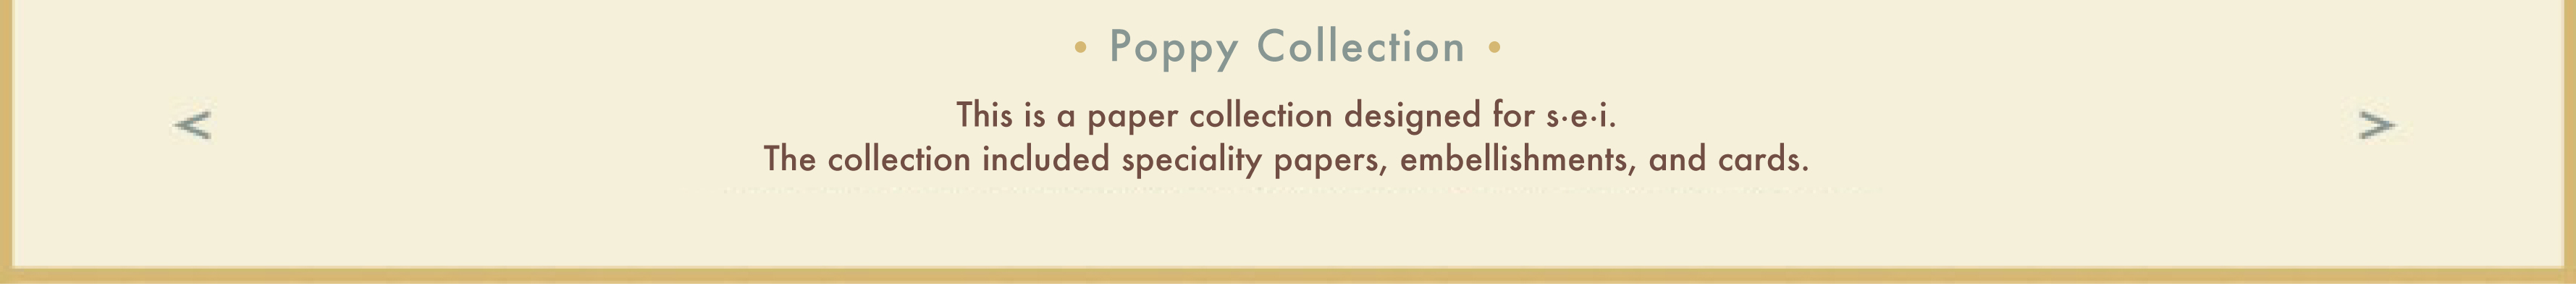 This is a summer paper collection designed for SEI.